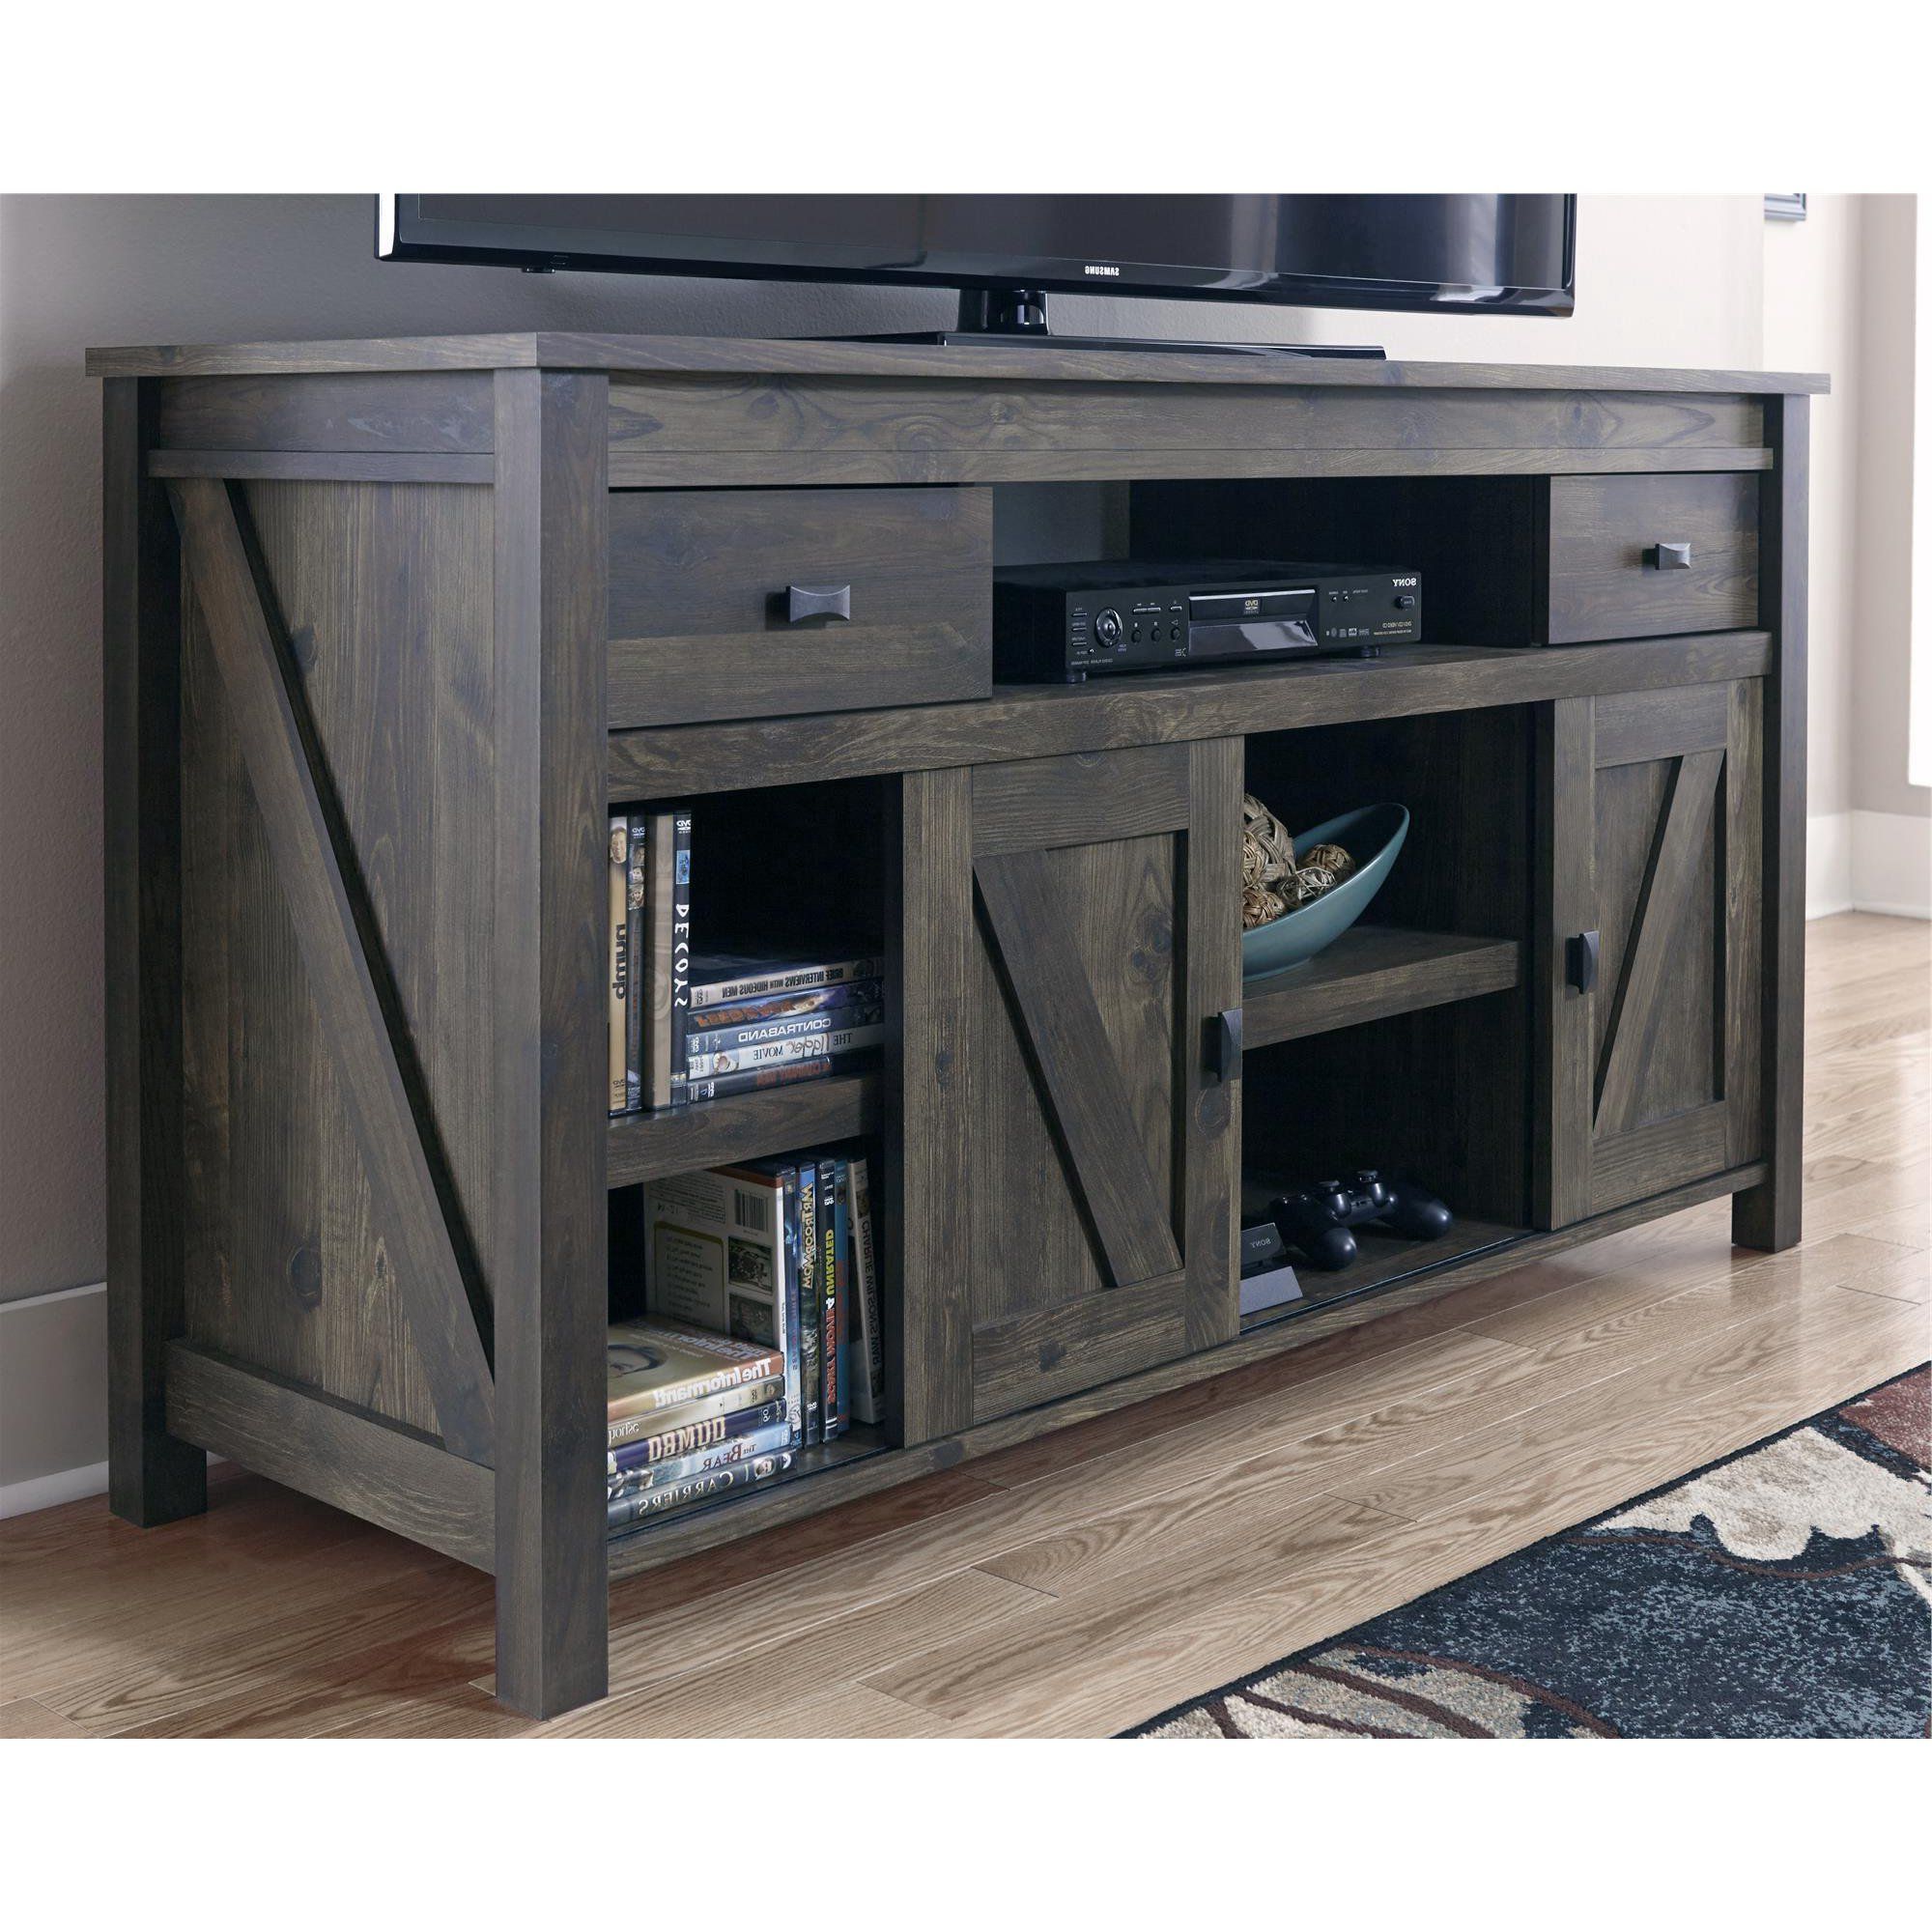 Woven Paths Scandi Farmhouse Tv Stand For Tvs Up To 60 In Woven Paths Farmhouse Barn Door Tv Stands In Multiple Finishes (Gallery 18 of 20)